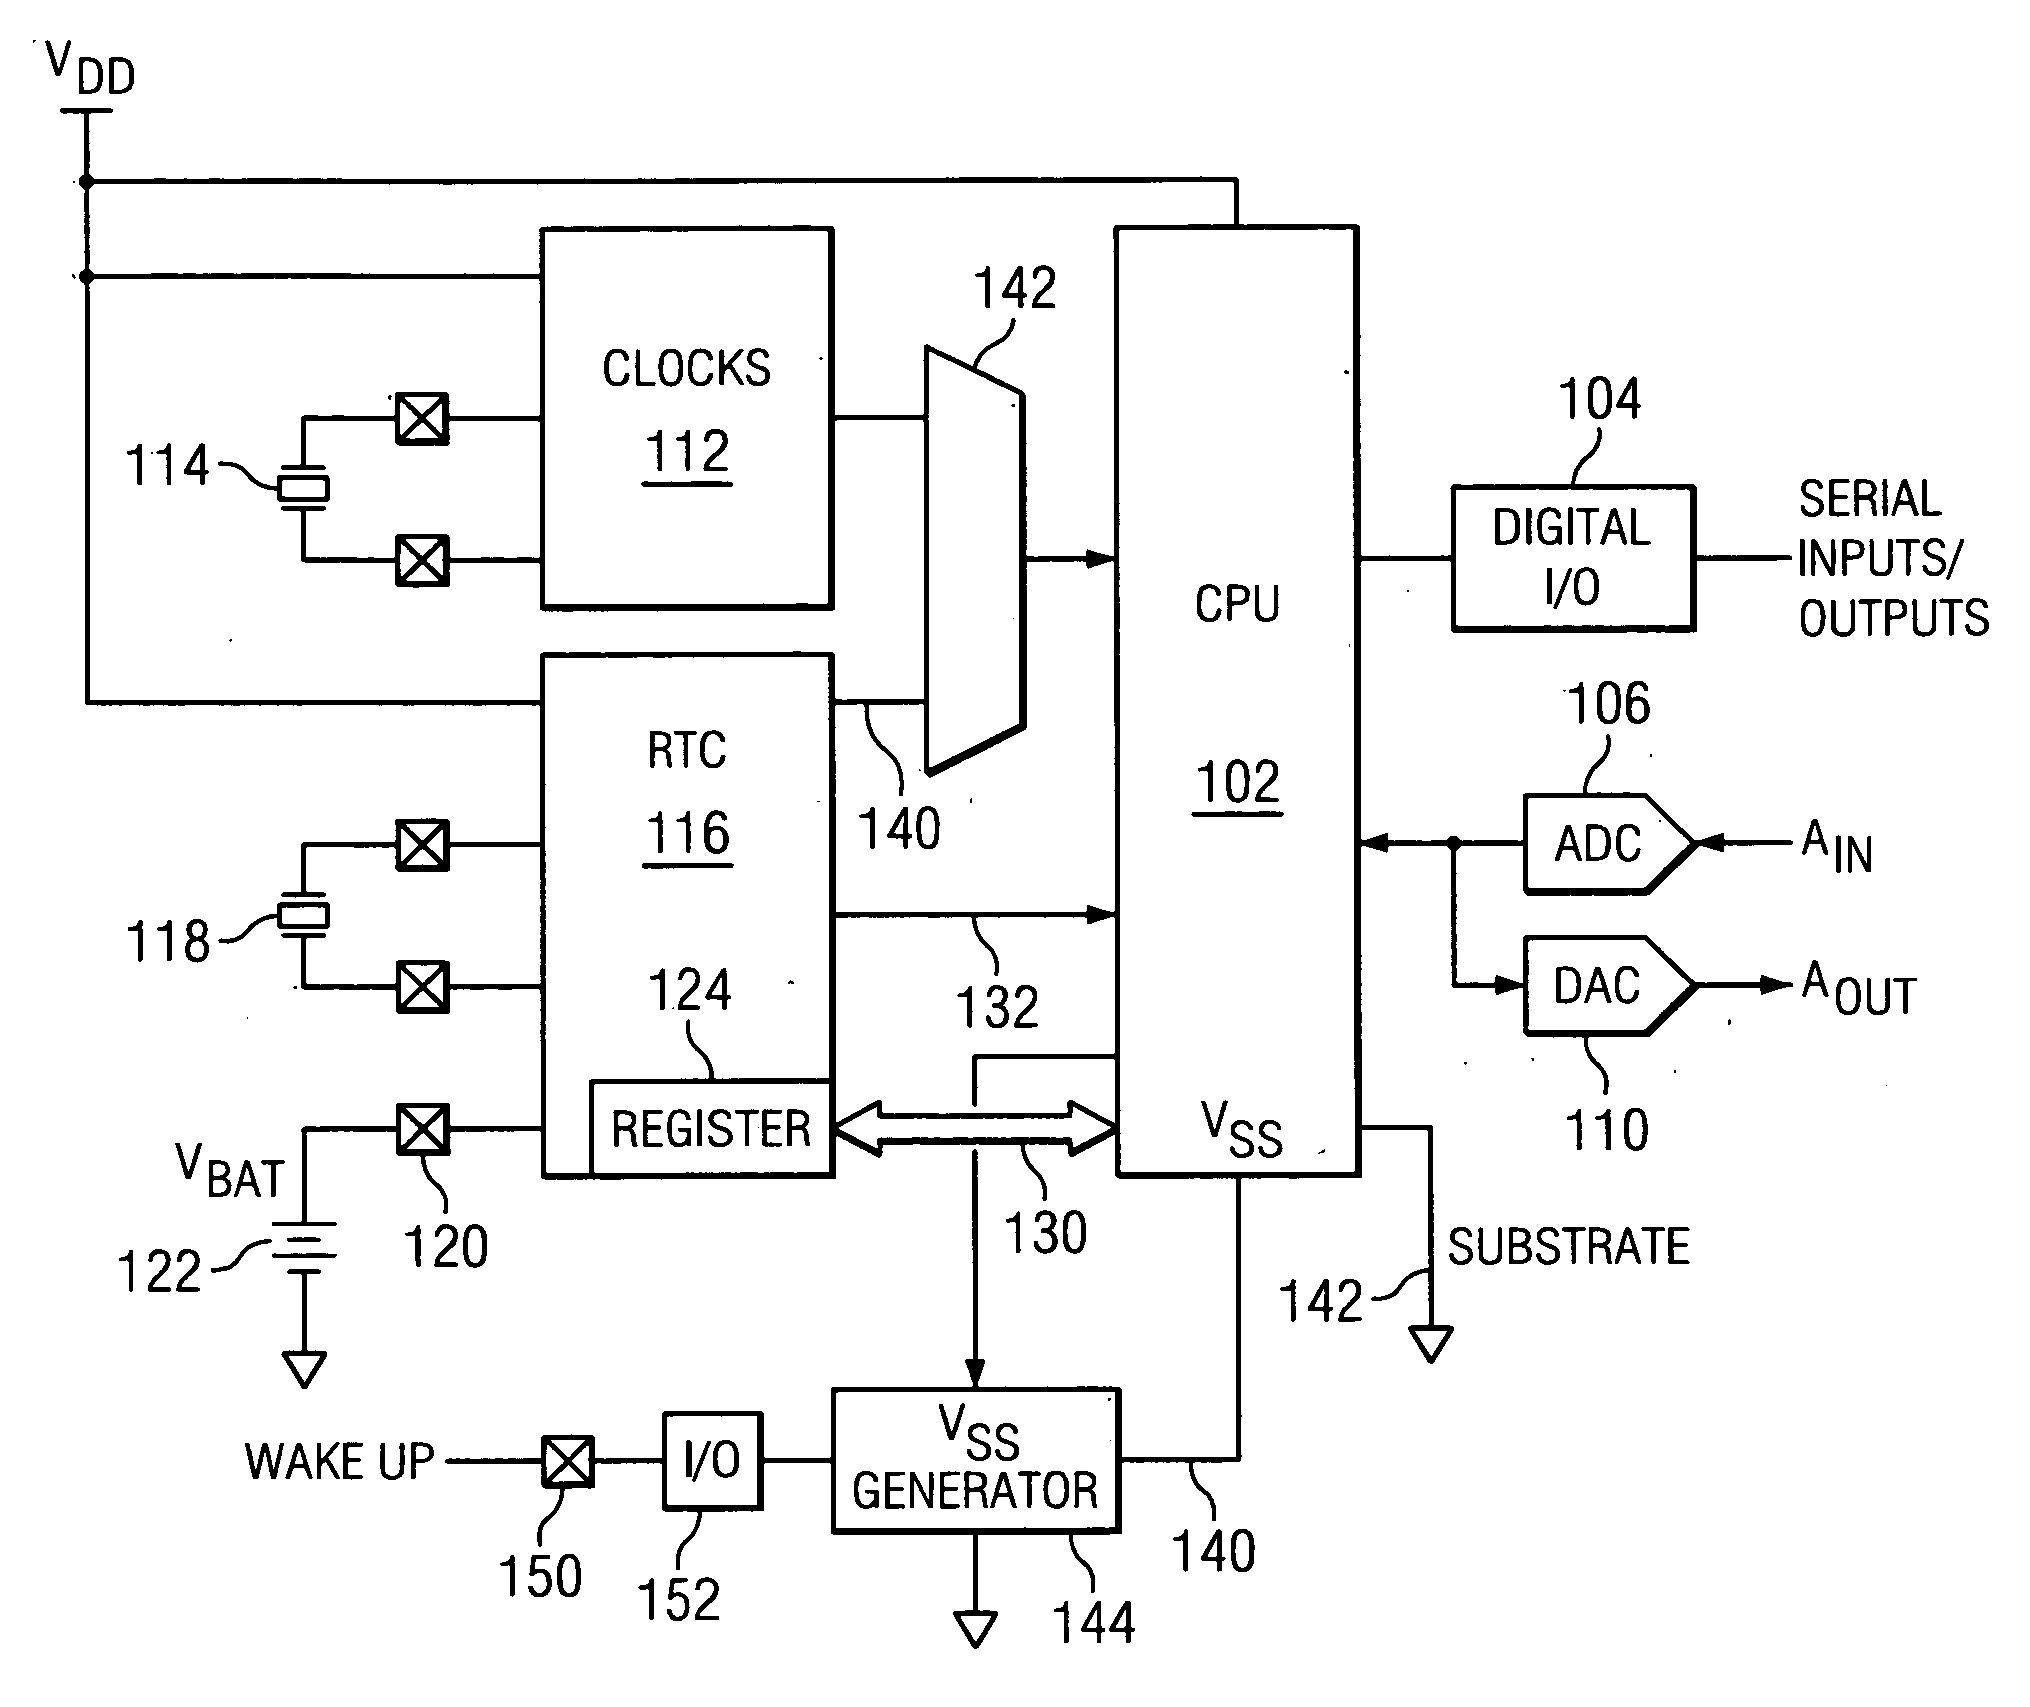 MCU with low power mode of operation